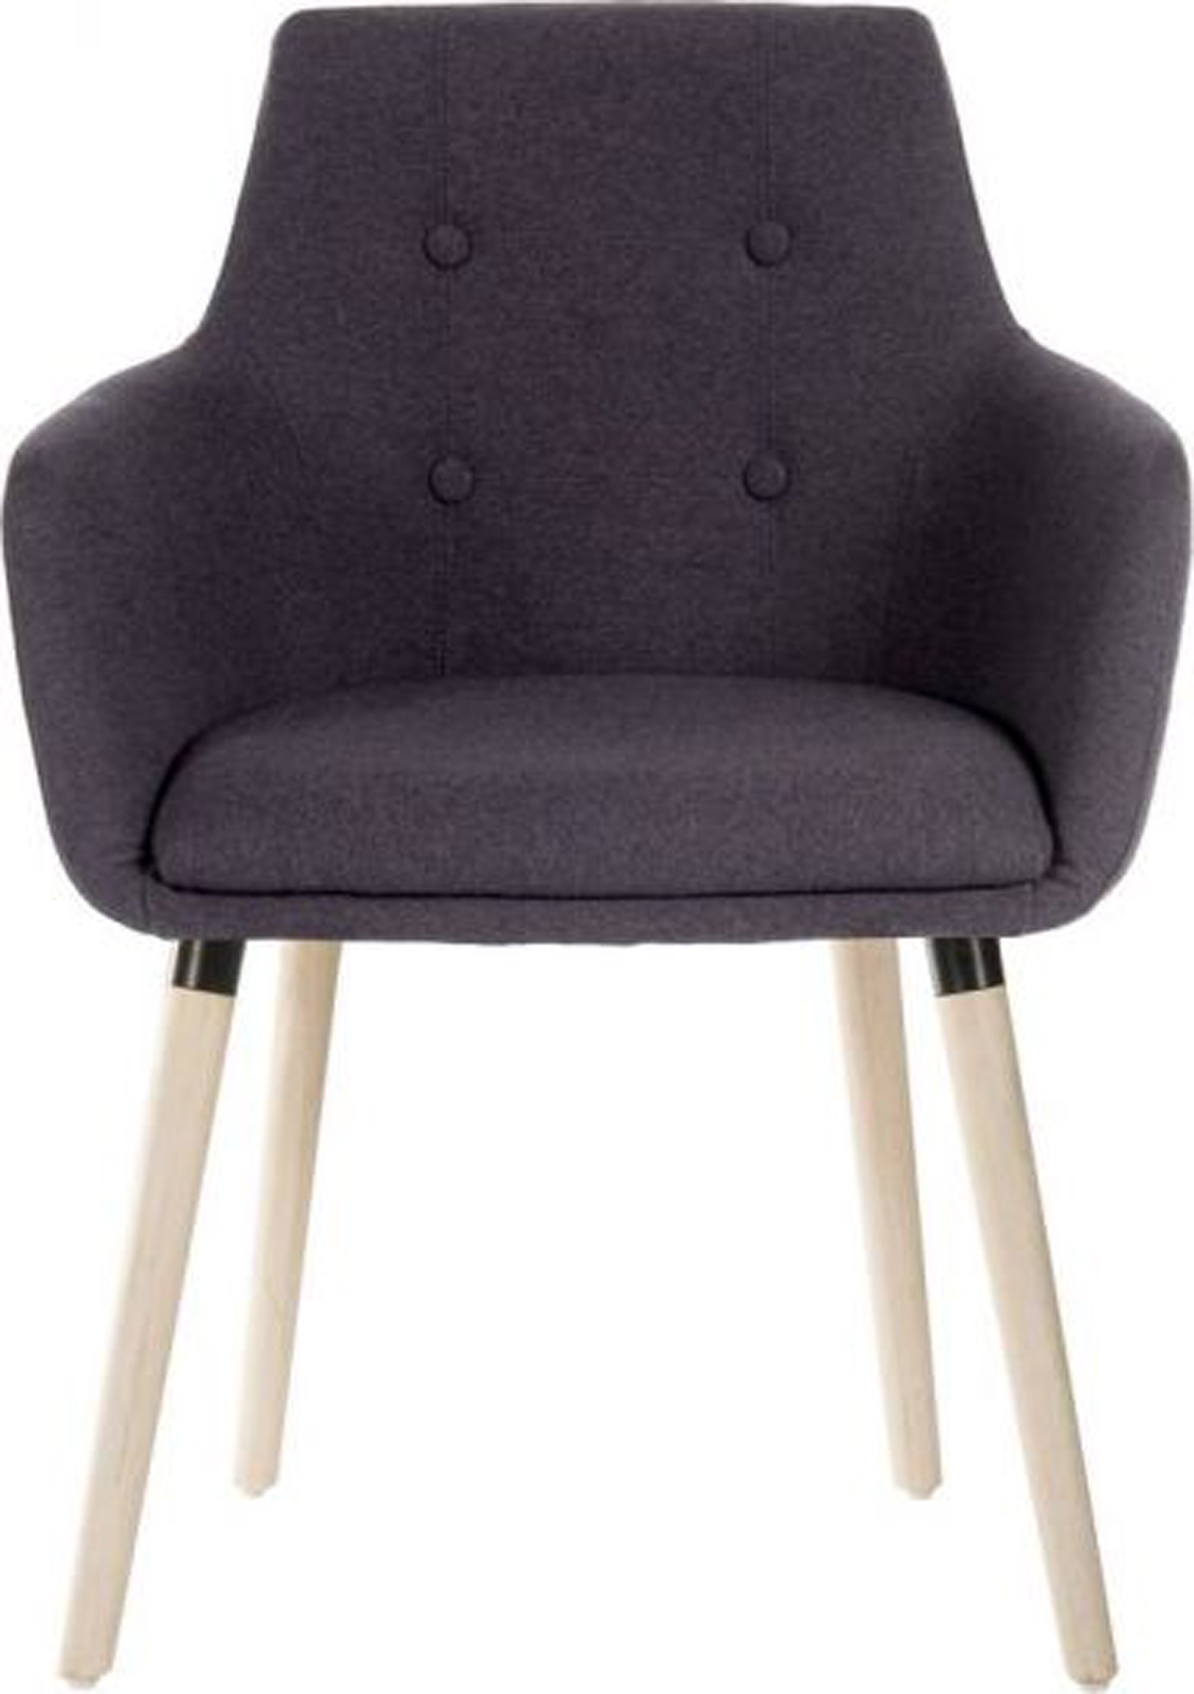 Upholstered Reception Chair - Grey